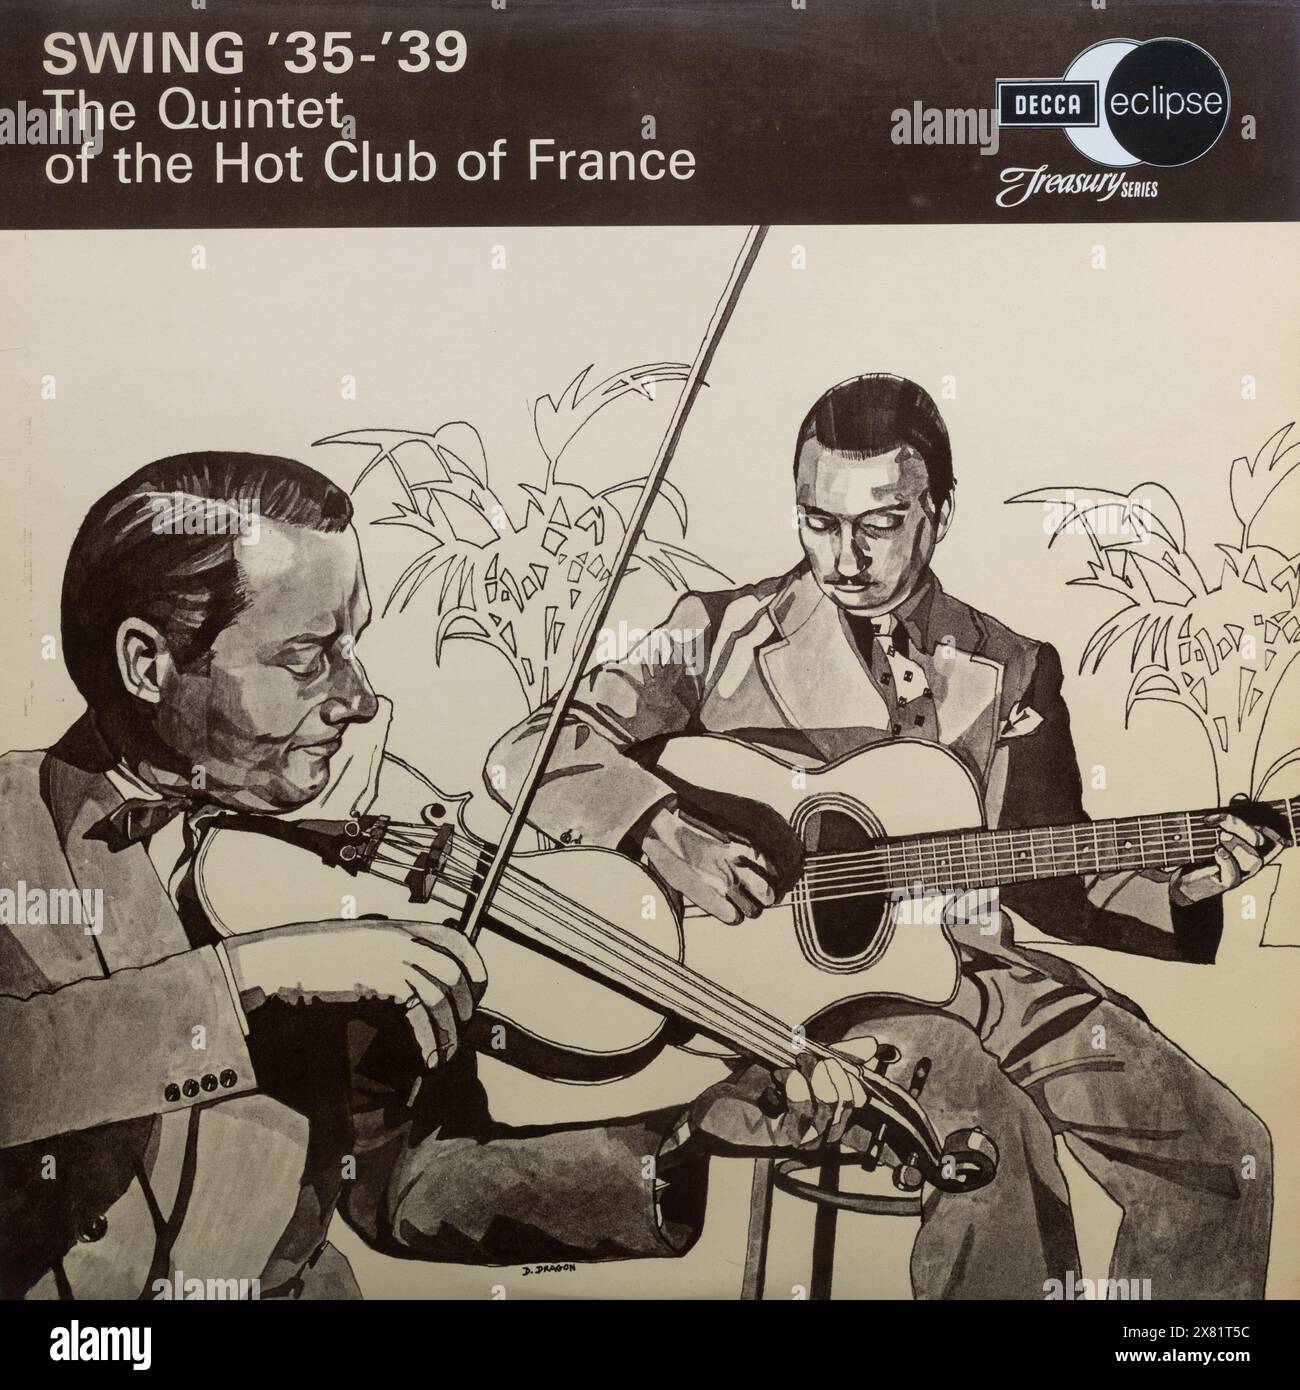 Swing '35-'39 The Quintet of the Hot Club of France album cover, vinyl LP record Stock Photo